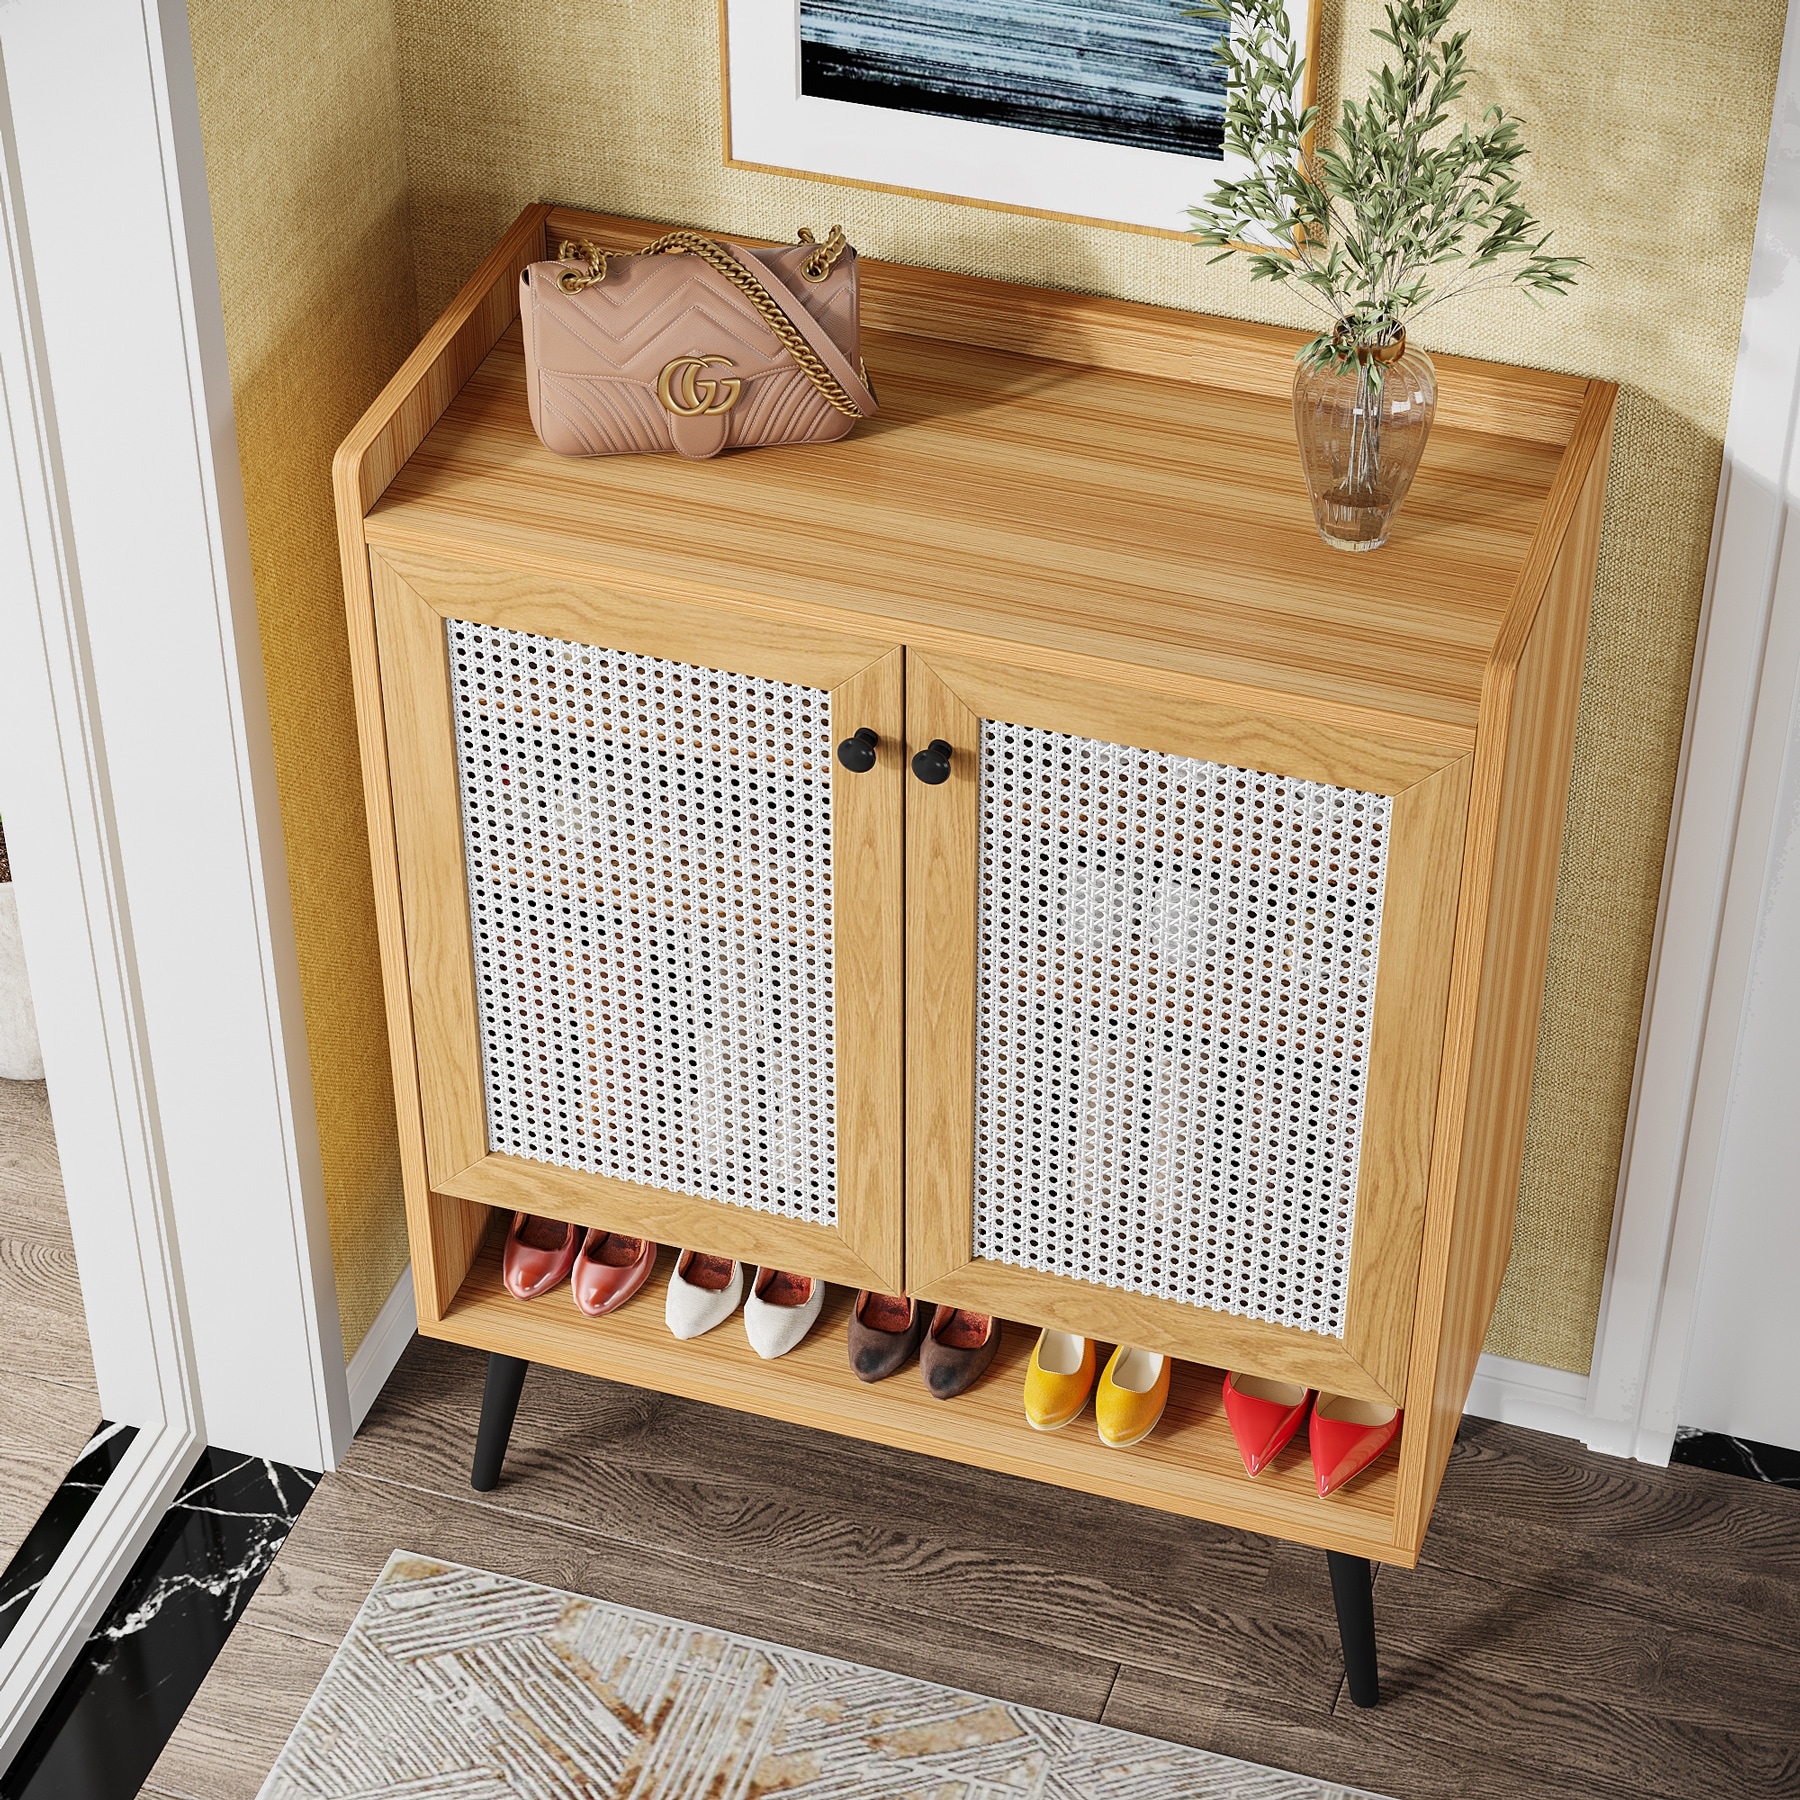 https://ak1.ostkcdn.com/images/products/is/images/direct/9f888b3b80cae73246a75961ace7412a412417f9/Shoe-Cabinet%2C-Rattan-Shoe-Rack-Organizer%2C-6-Tiers-24-30-Pairs-Heavy-Duty-Shoe-Storage-Cabinet-with-Doors-for-Entryway.jpg